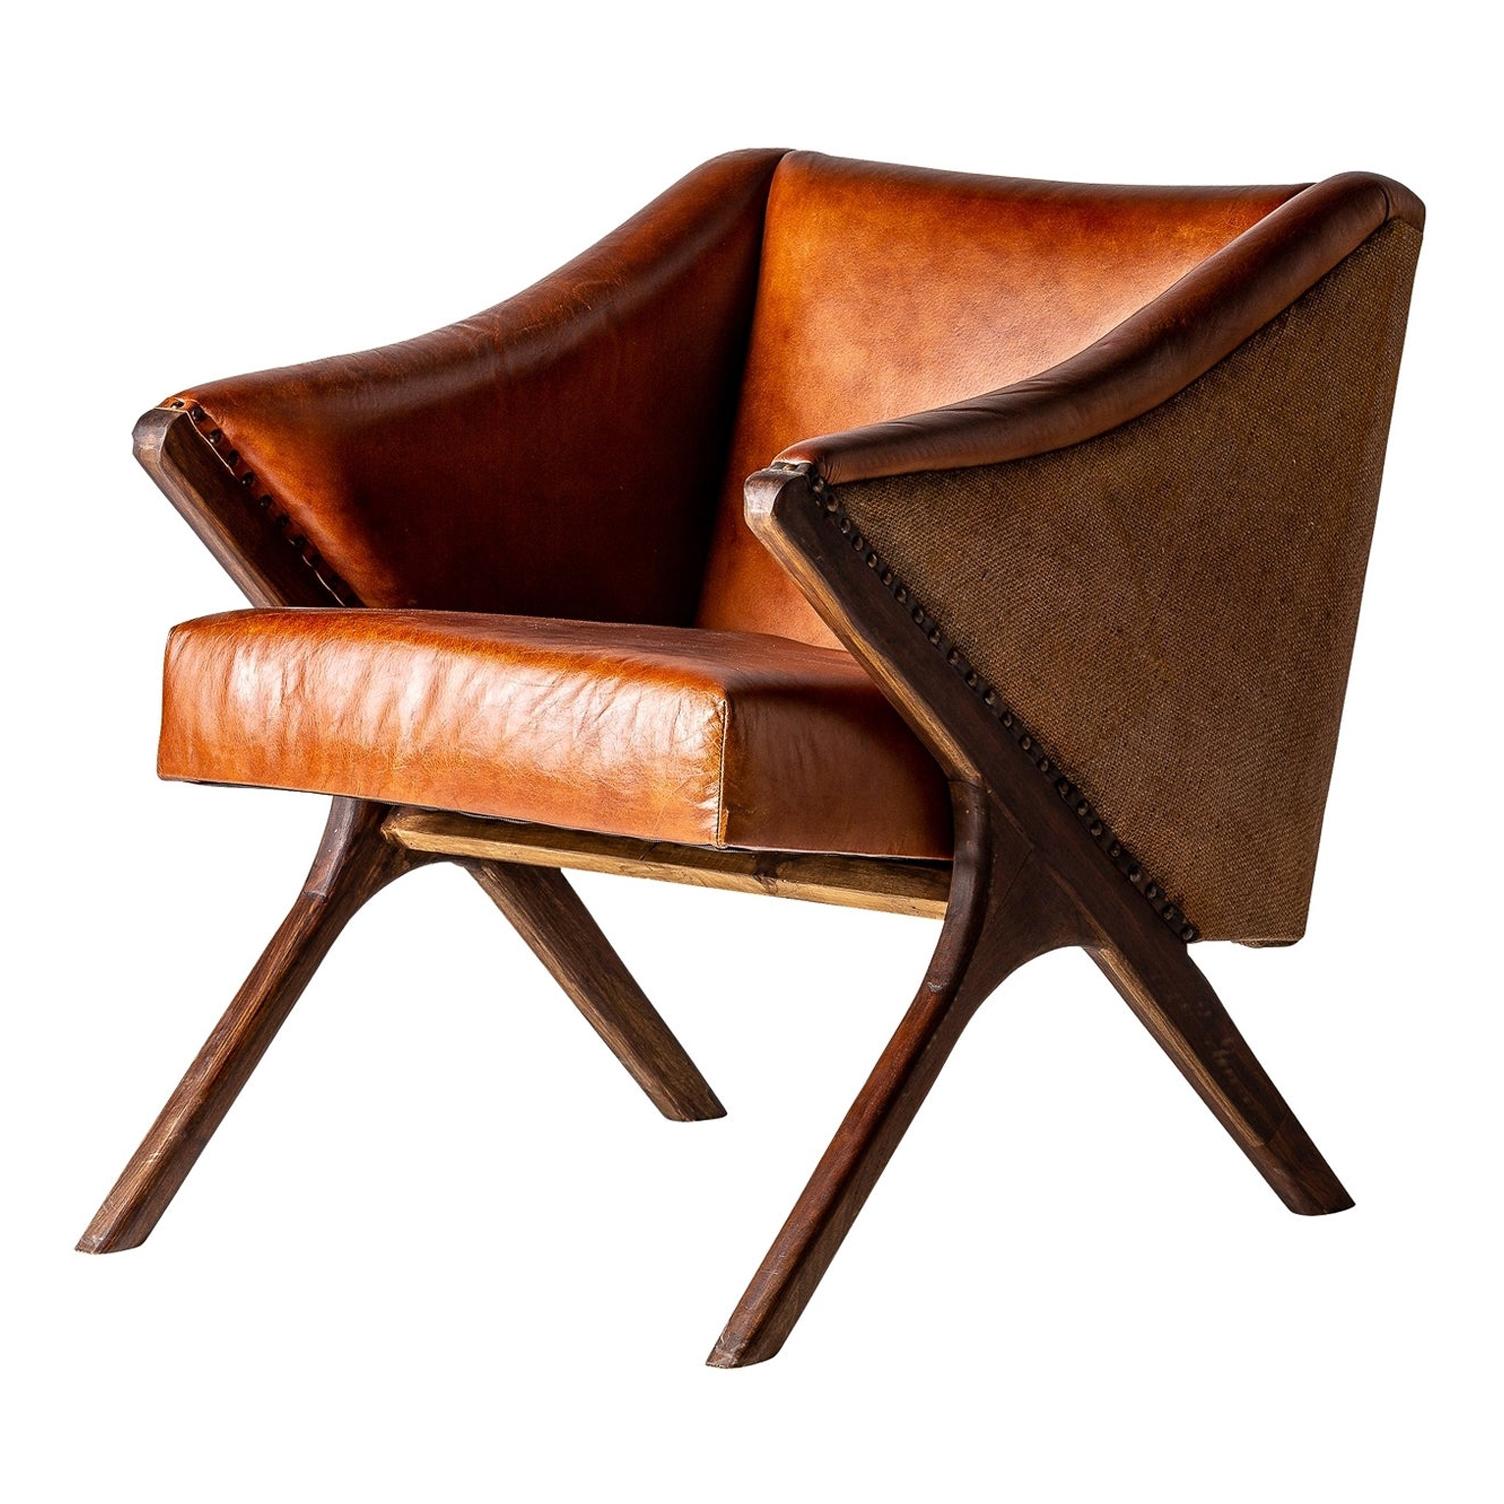 1950s Danish Design Style Cognac Leather and Wooden Armchair